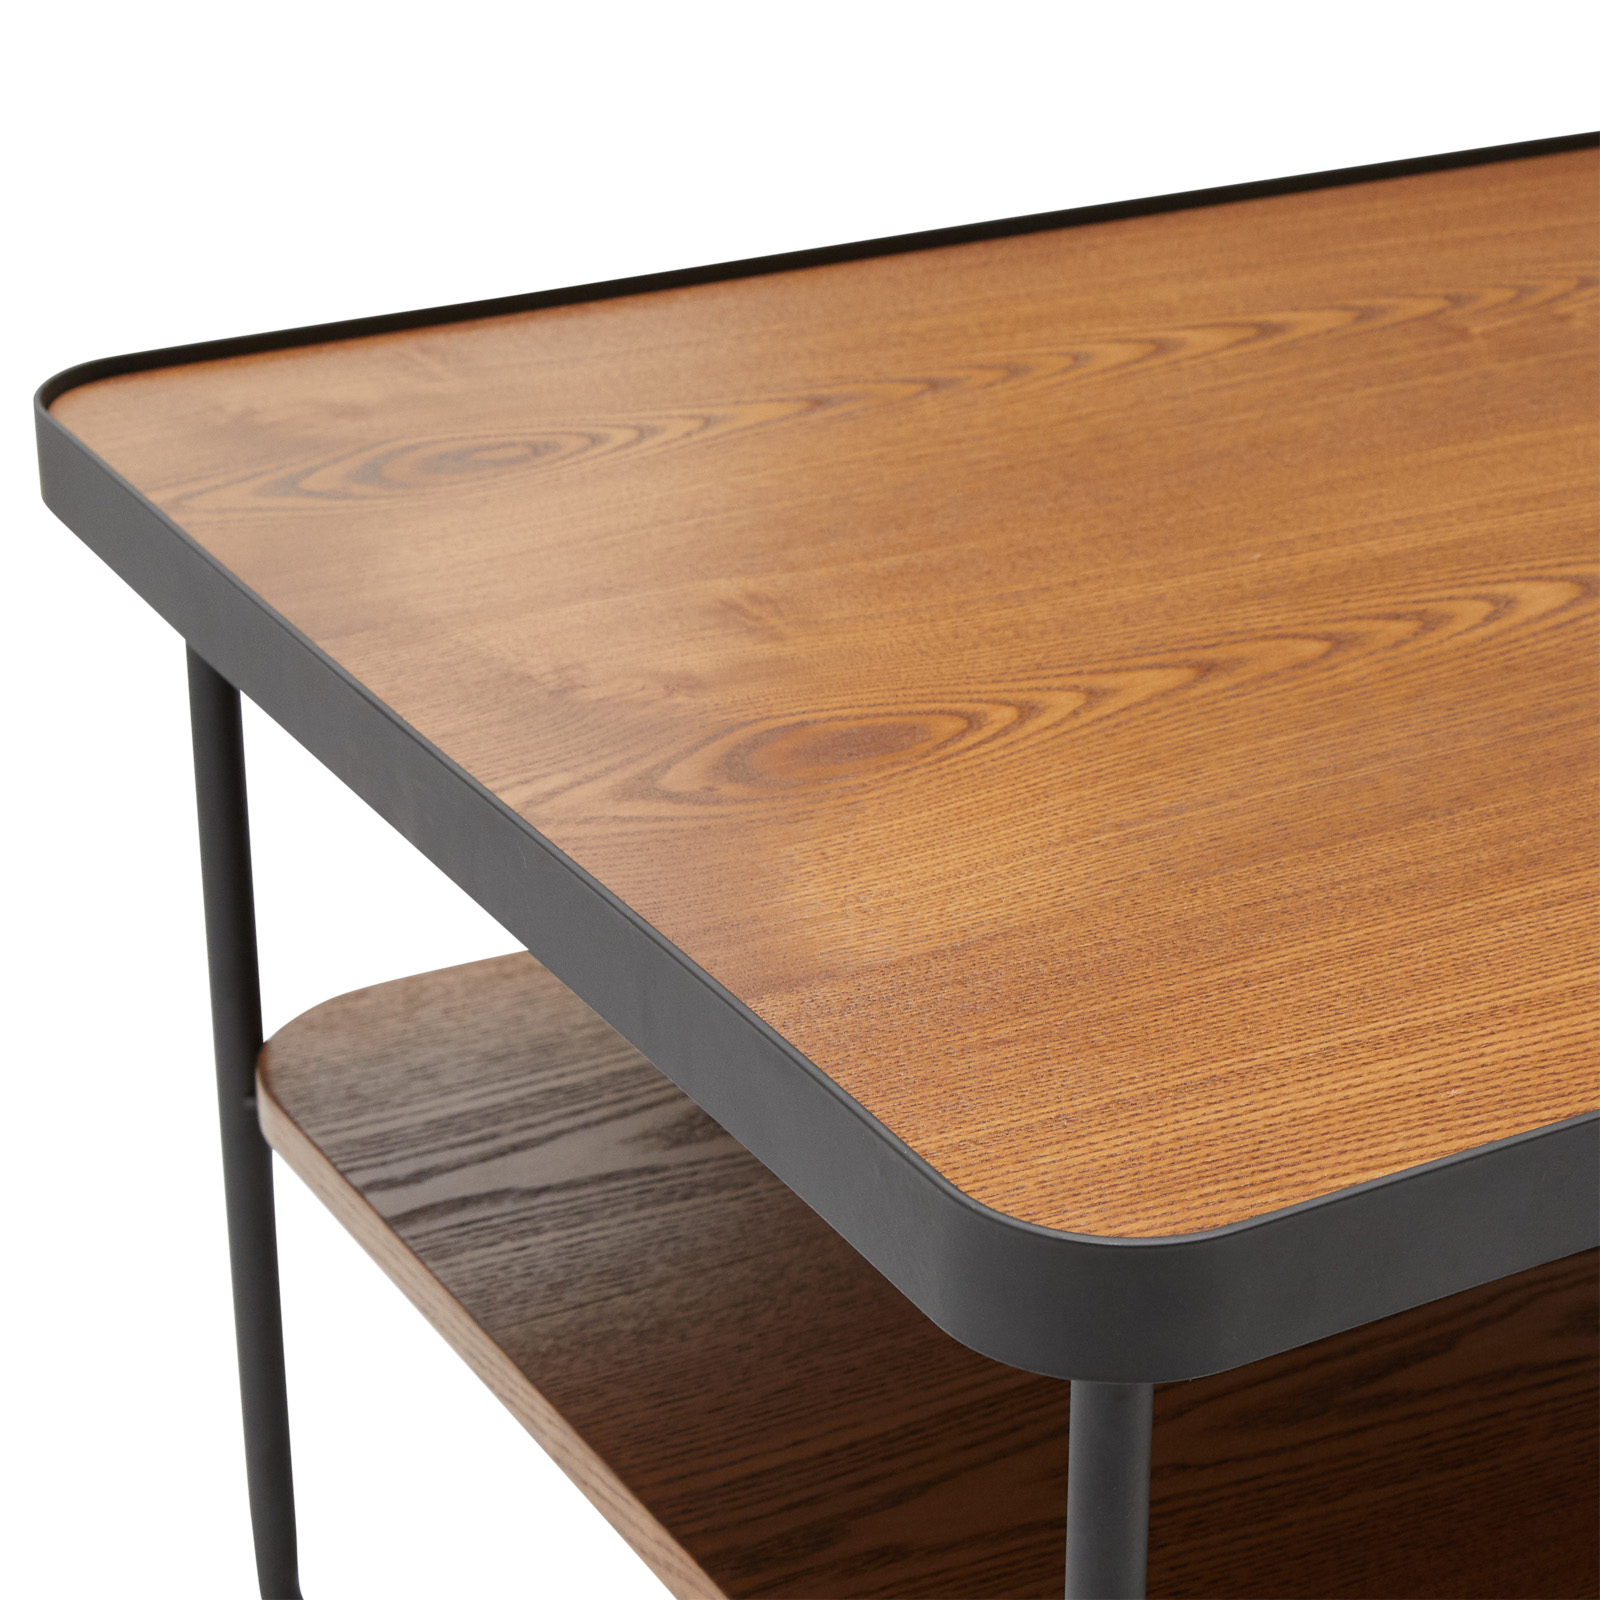 MoDRN Industrial Callen Coffee Table - Walnut and Charcoal Gray - image 5 of 12